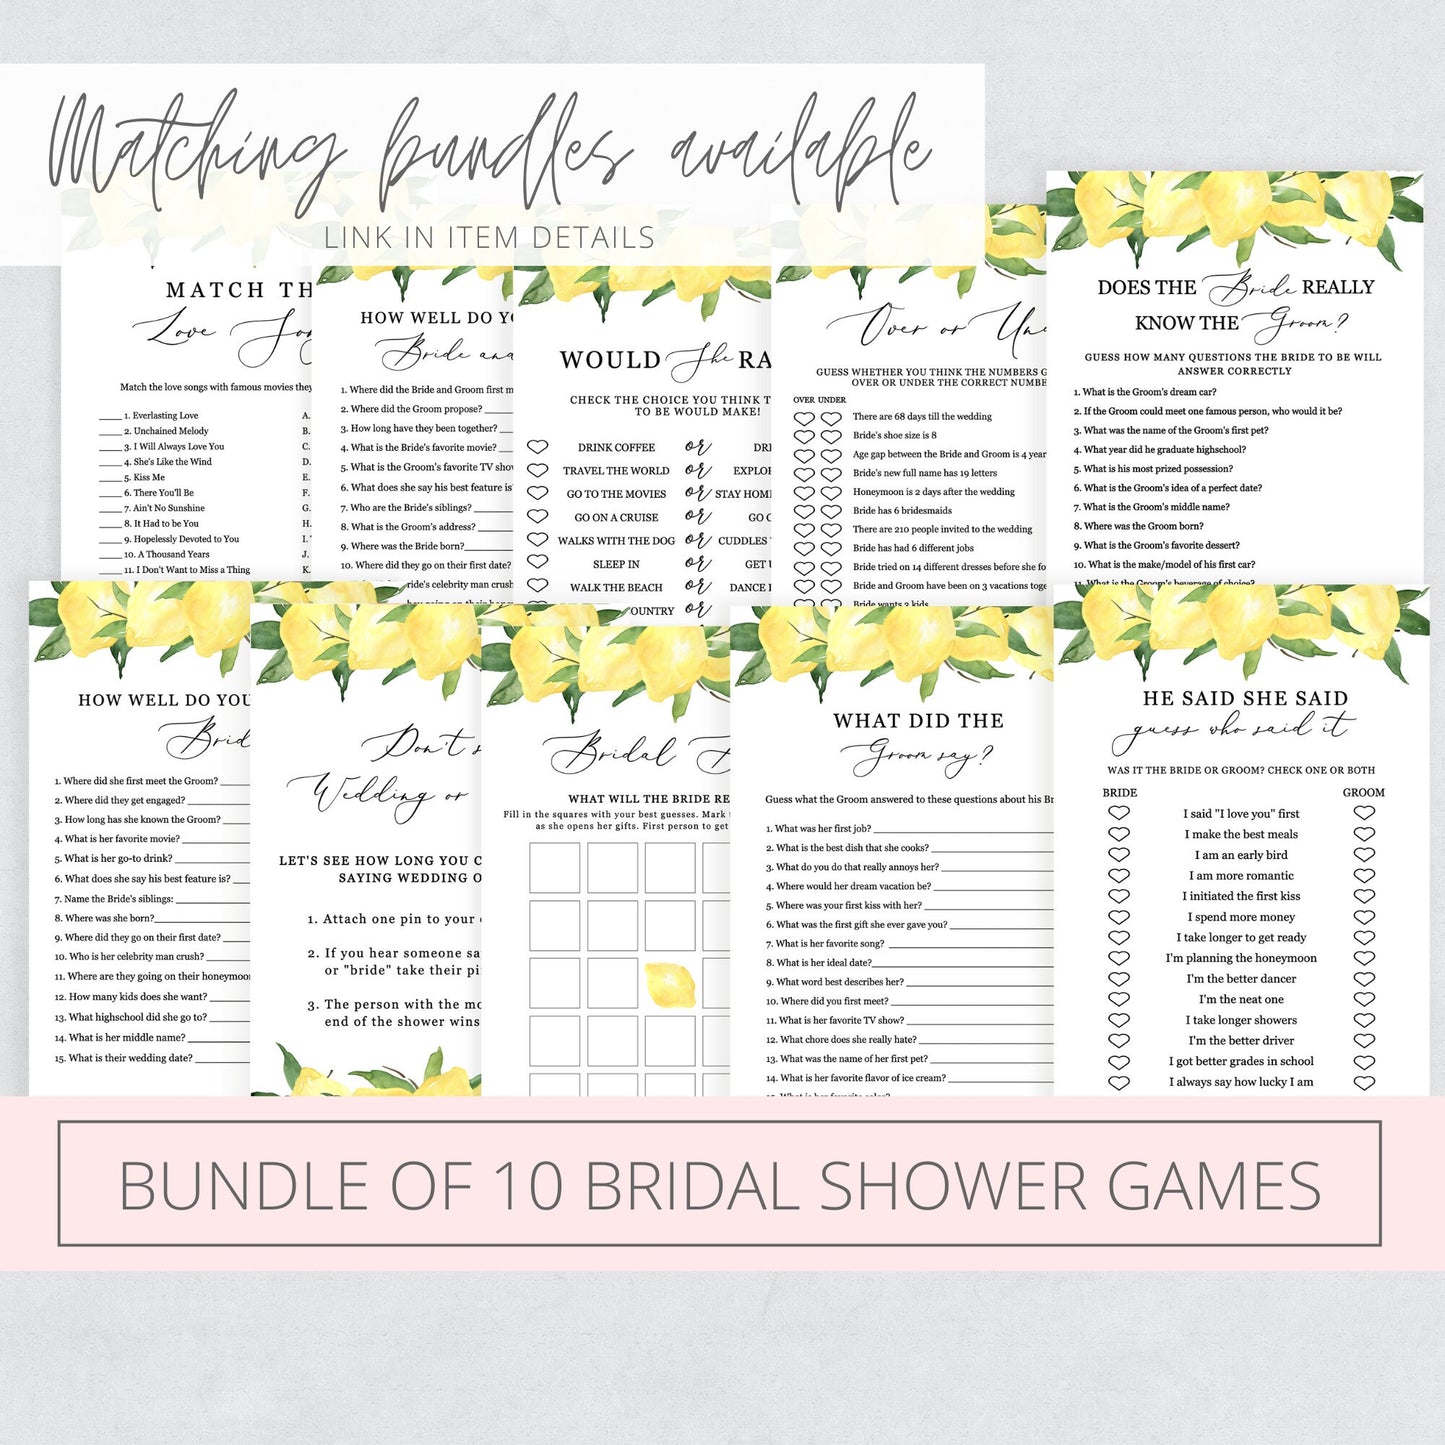 Editable Lemon How Old Was the Bride Citrus Bridal Shower Games Guess the Age of the Bride Template